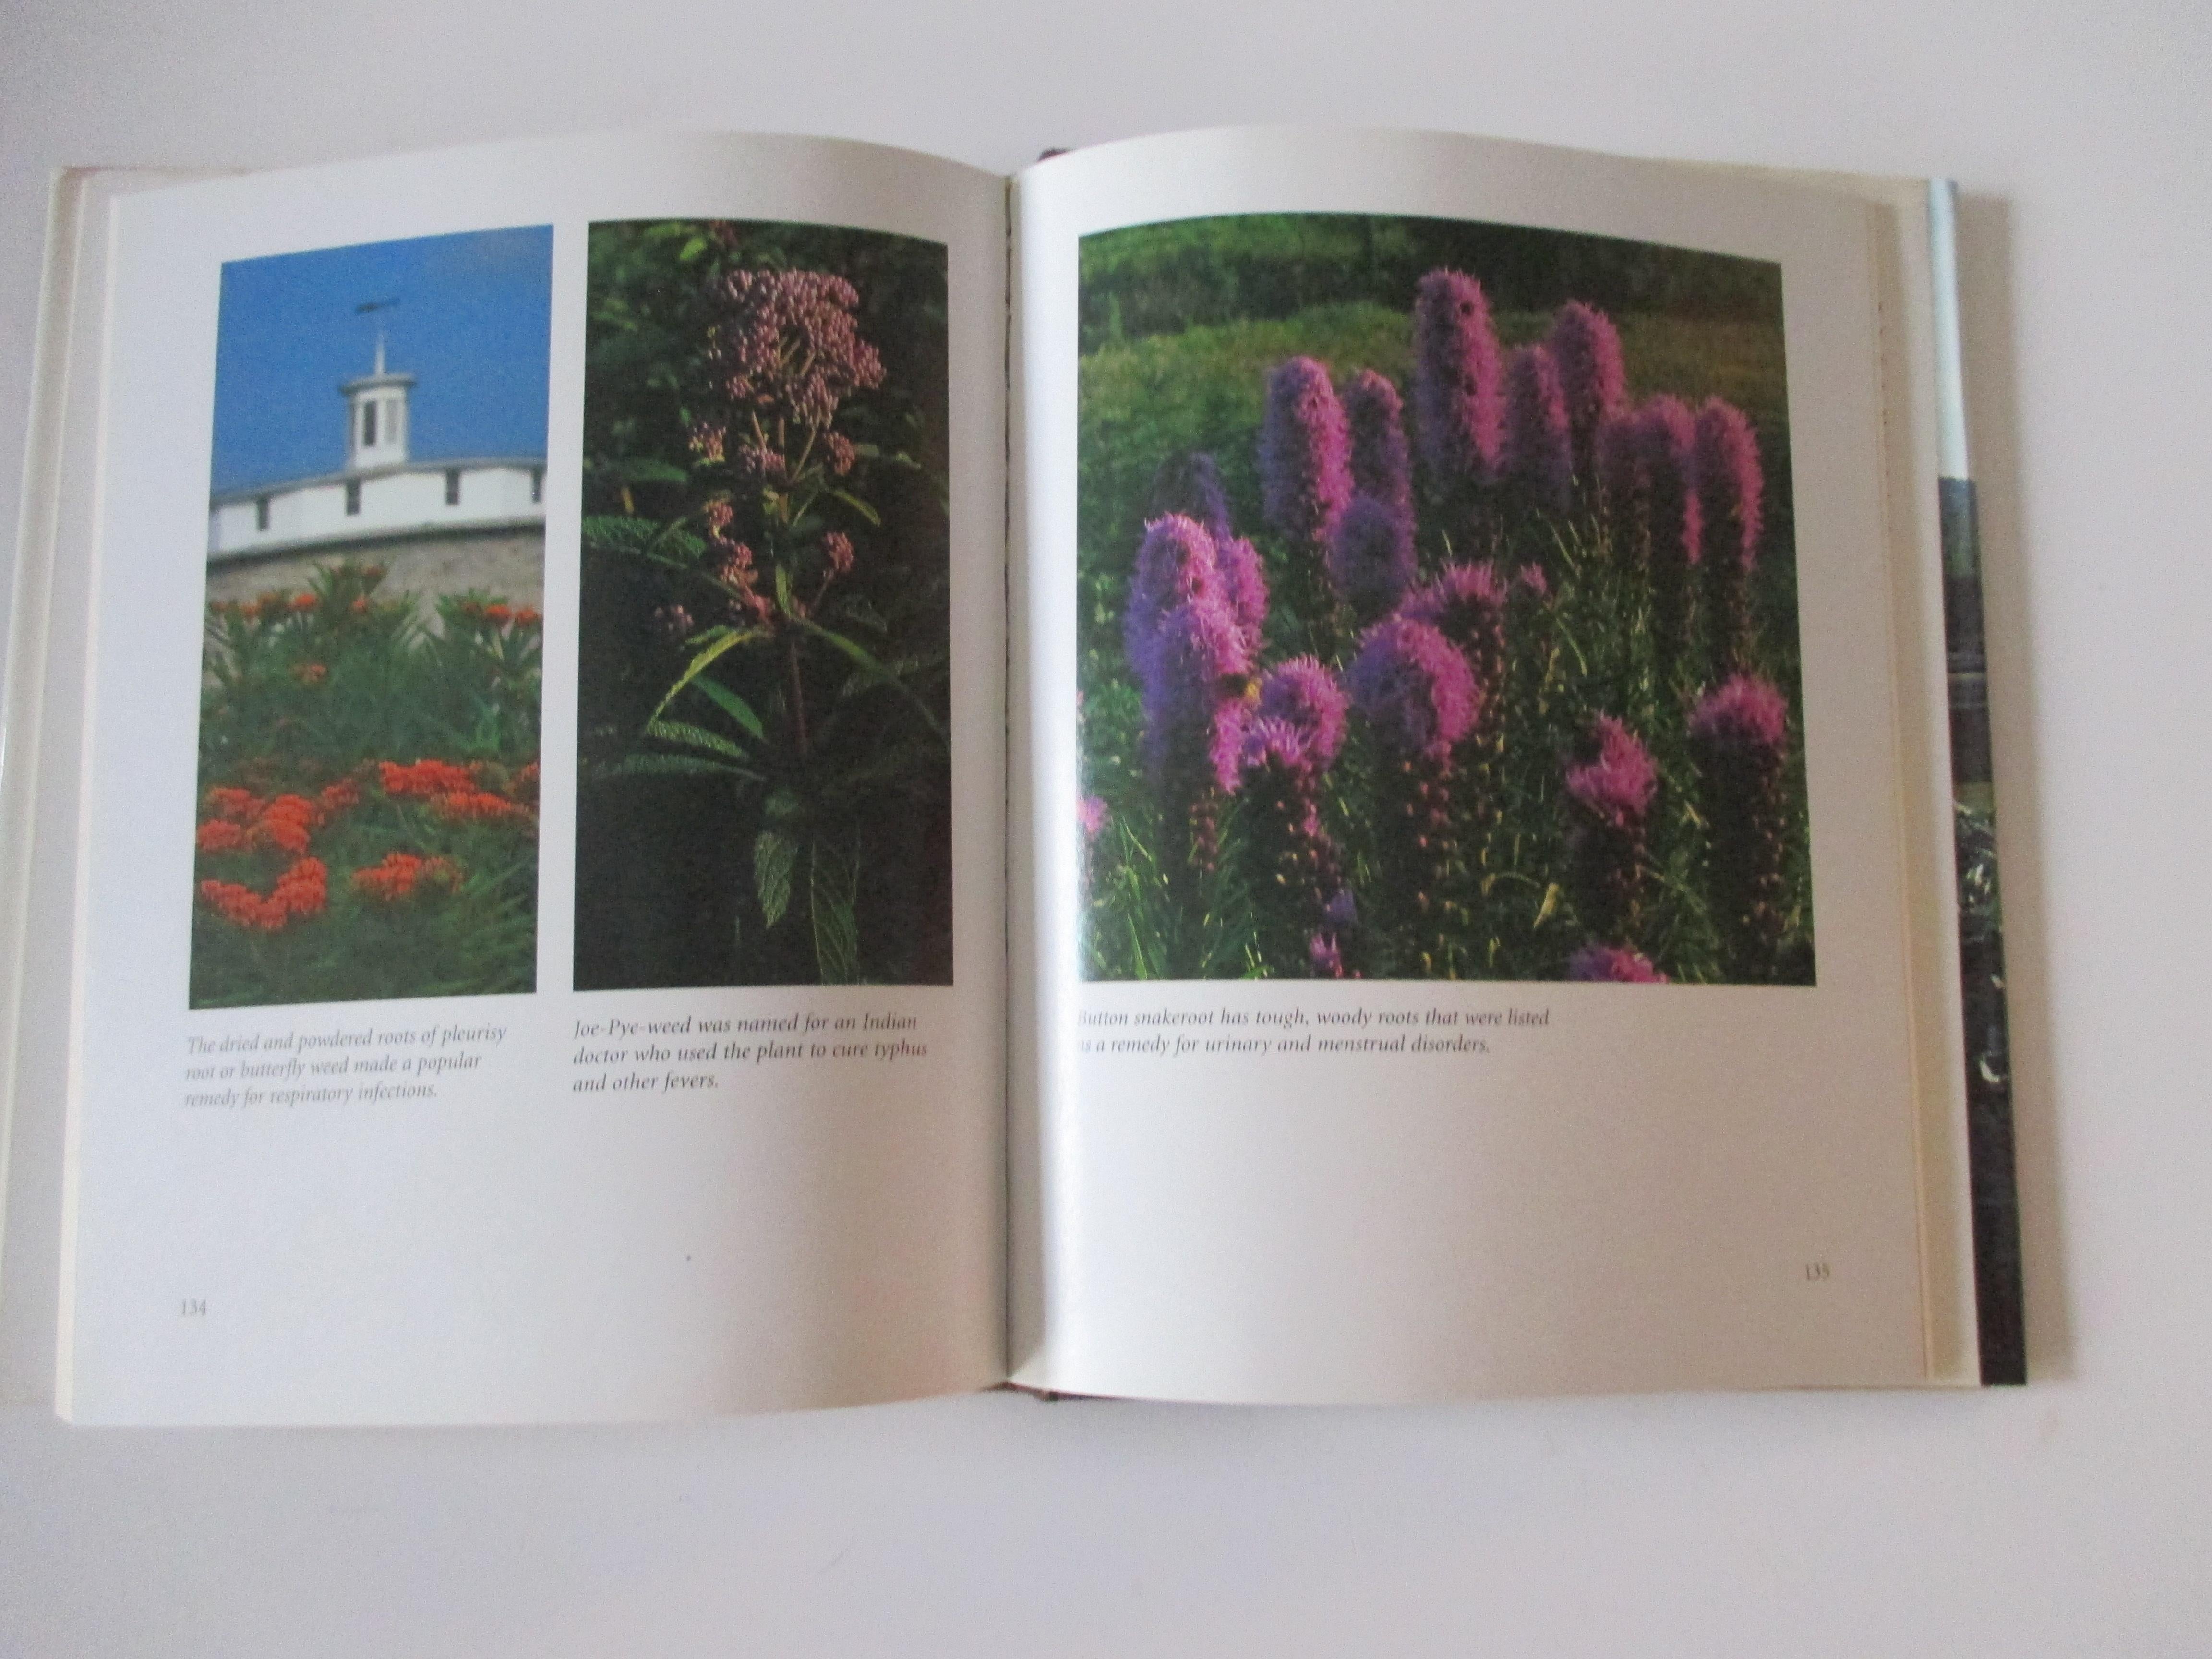 North American The Shaker Herb and Garden Vintage Book by R. Buchannan